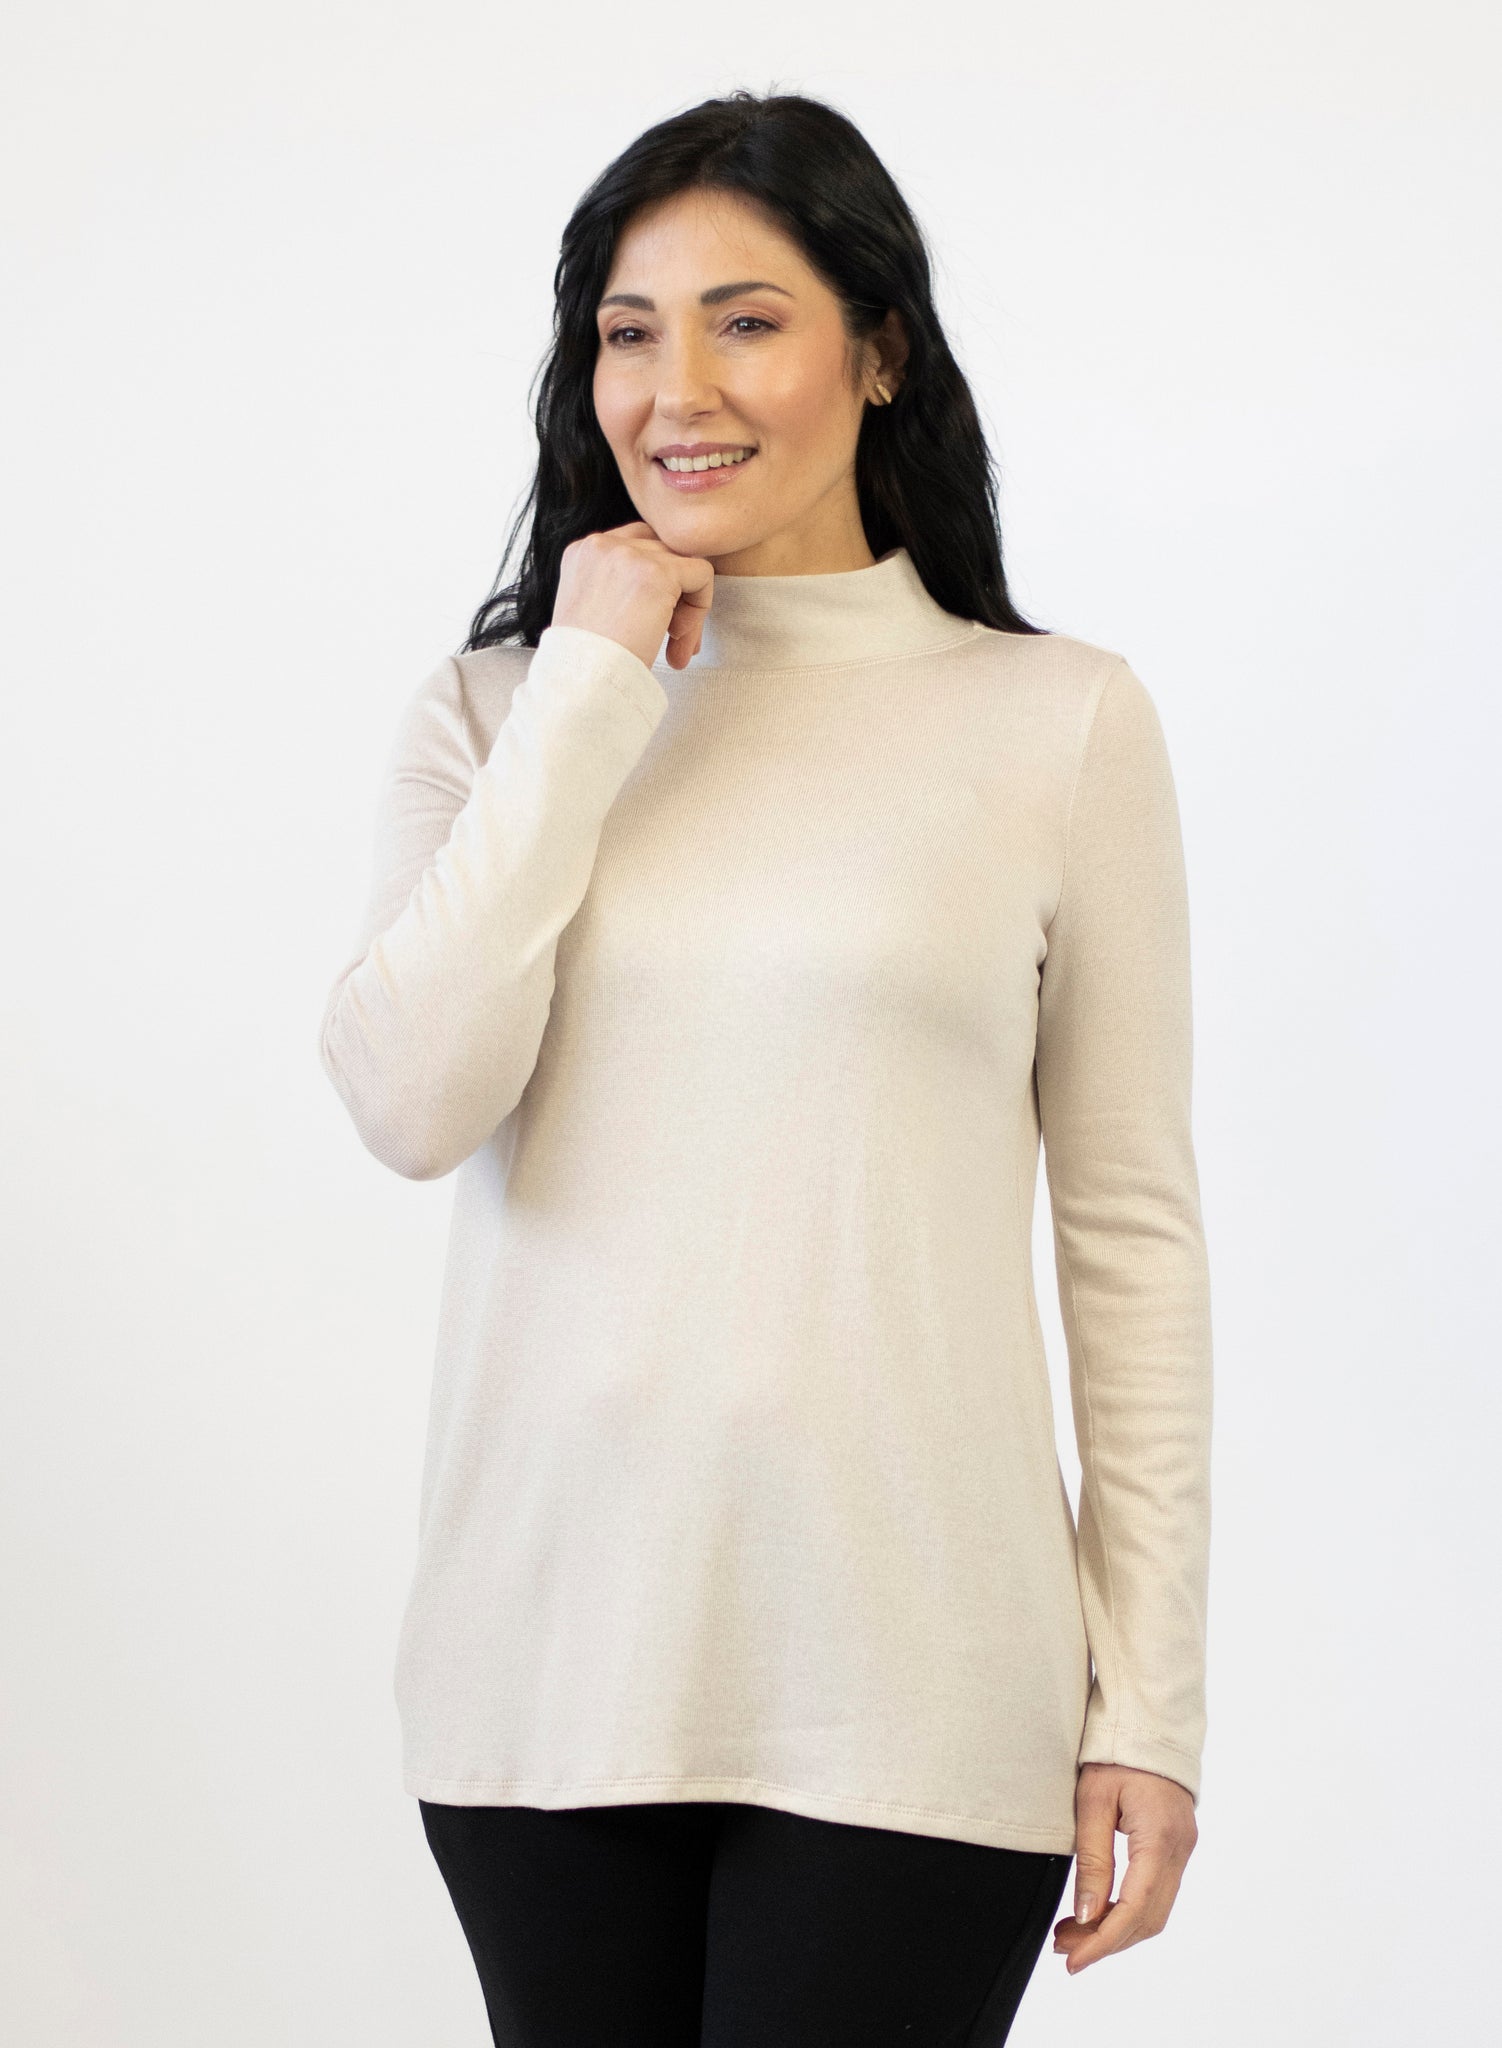 Cream mock neck fitting loose to the body with full length sleeves. Tencel Modal blend lux fabric